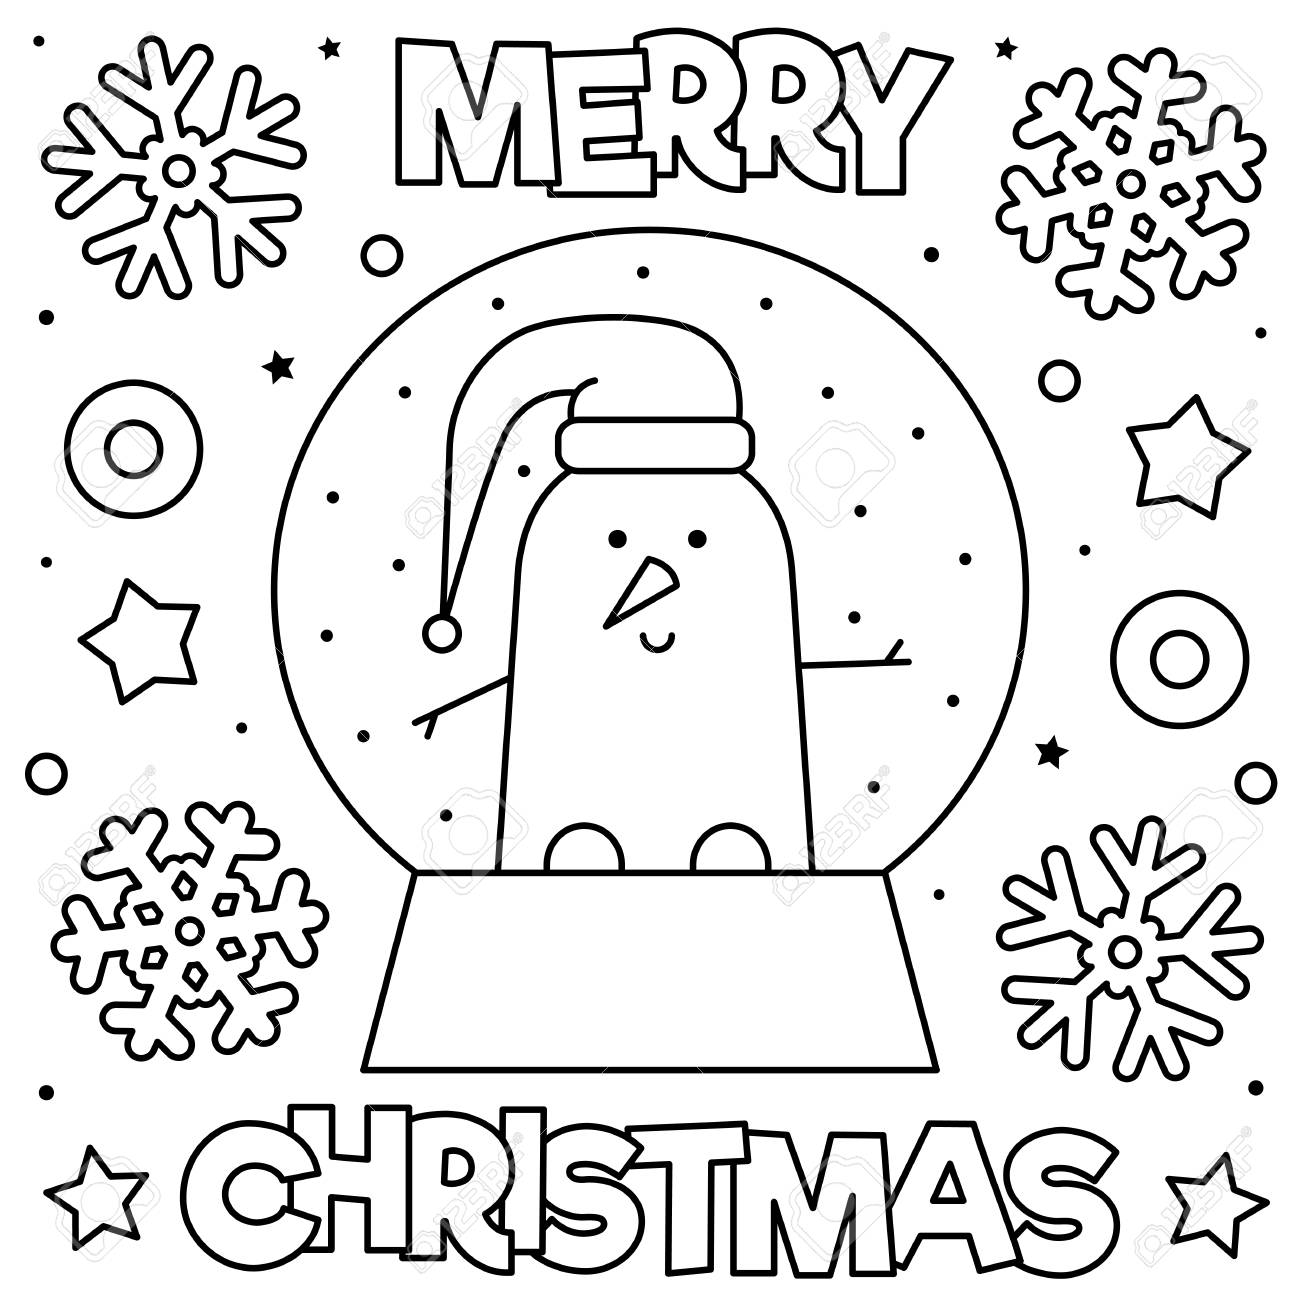 Staggering Snowbe Coloring Page Image Ideas Snowglobe Pages Best For Kids  Worksheets Christmas Kindergarten – Fundacion Luchadoresav